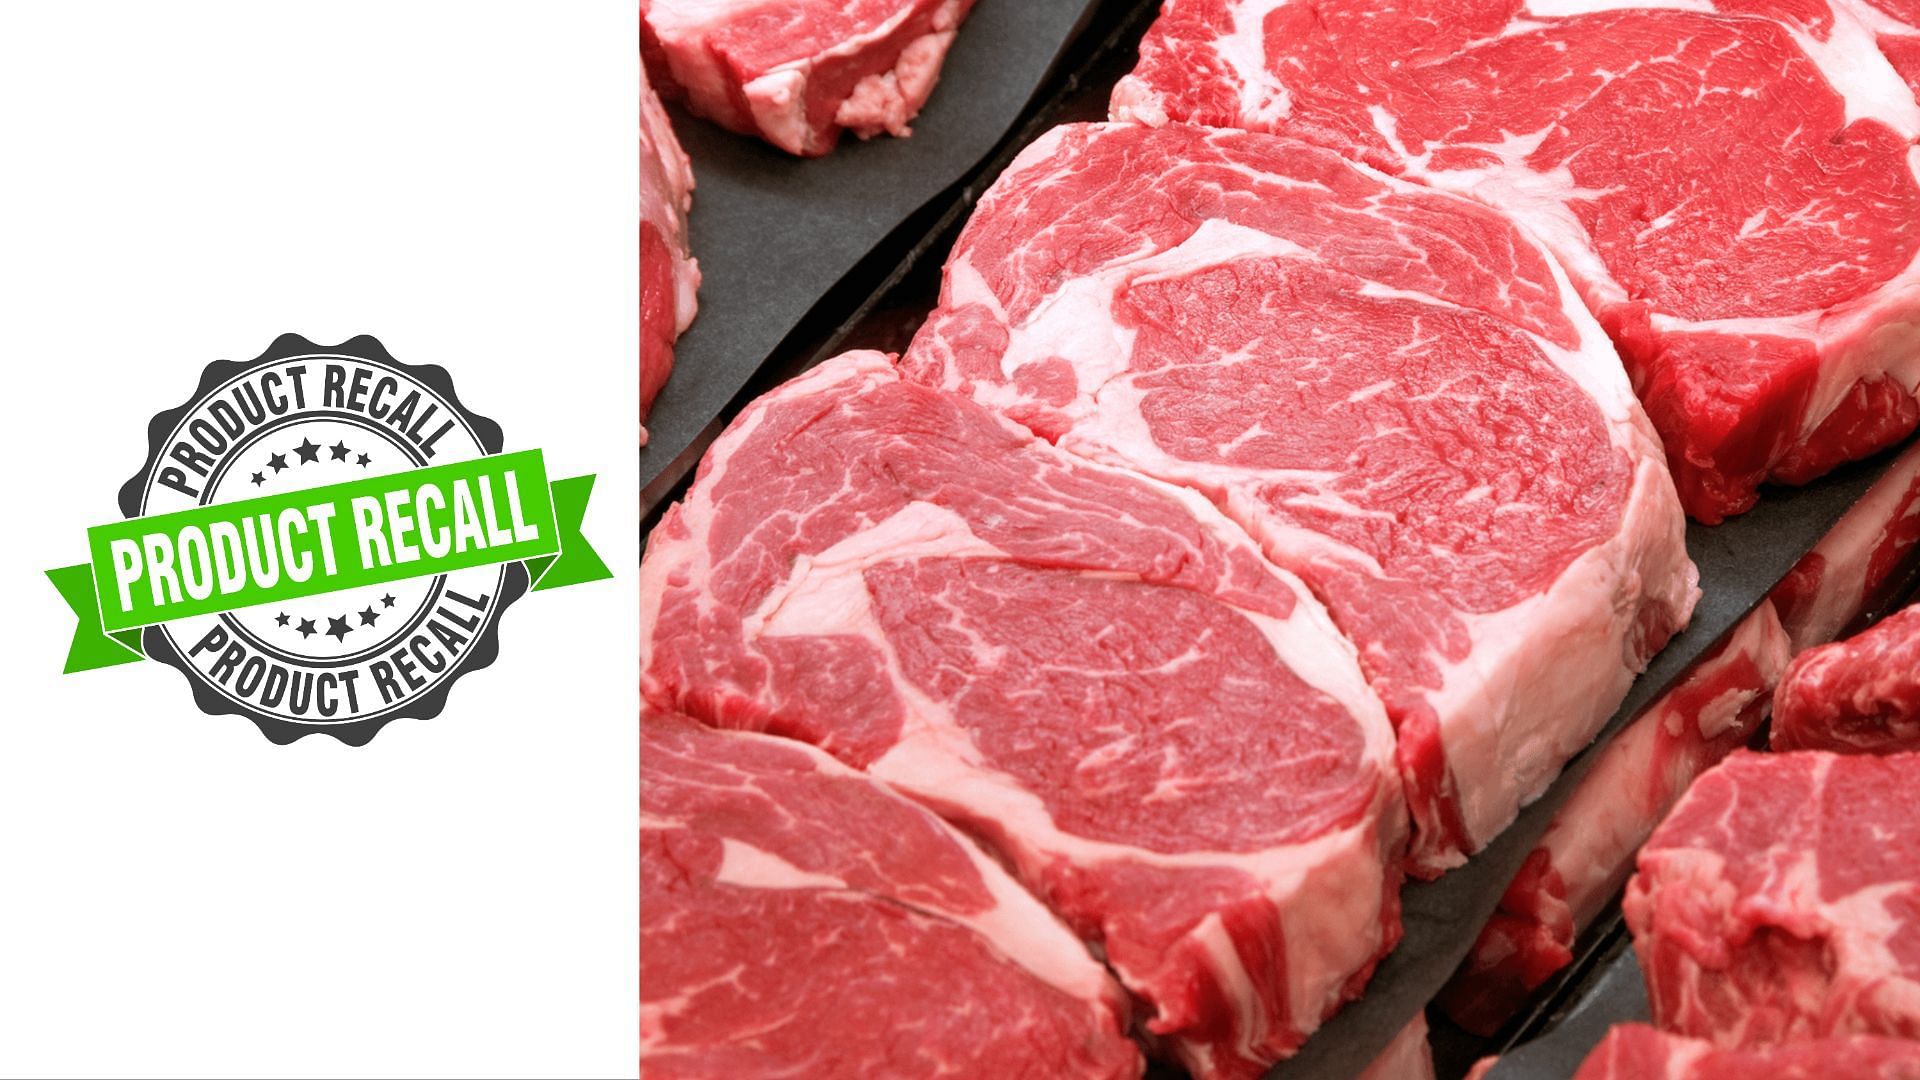 Elkhorn Valley Packing recalls Boneless Beef Chuck products over concerns about potential contamination with with Shiga Toxin-Producing E. coli (Image via MagnetCreative/Getty Images) 